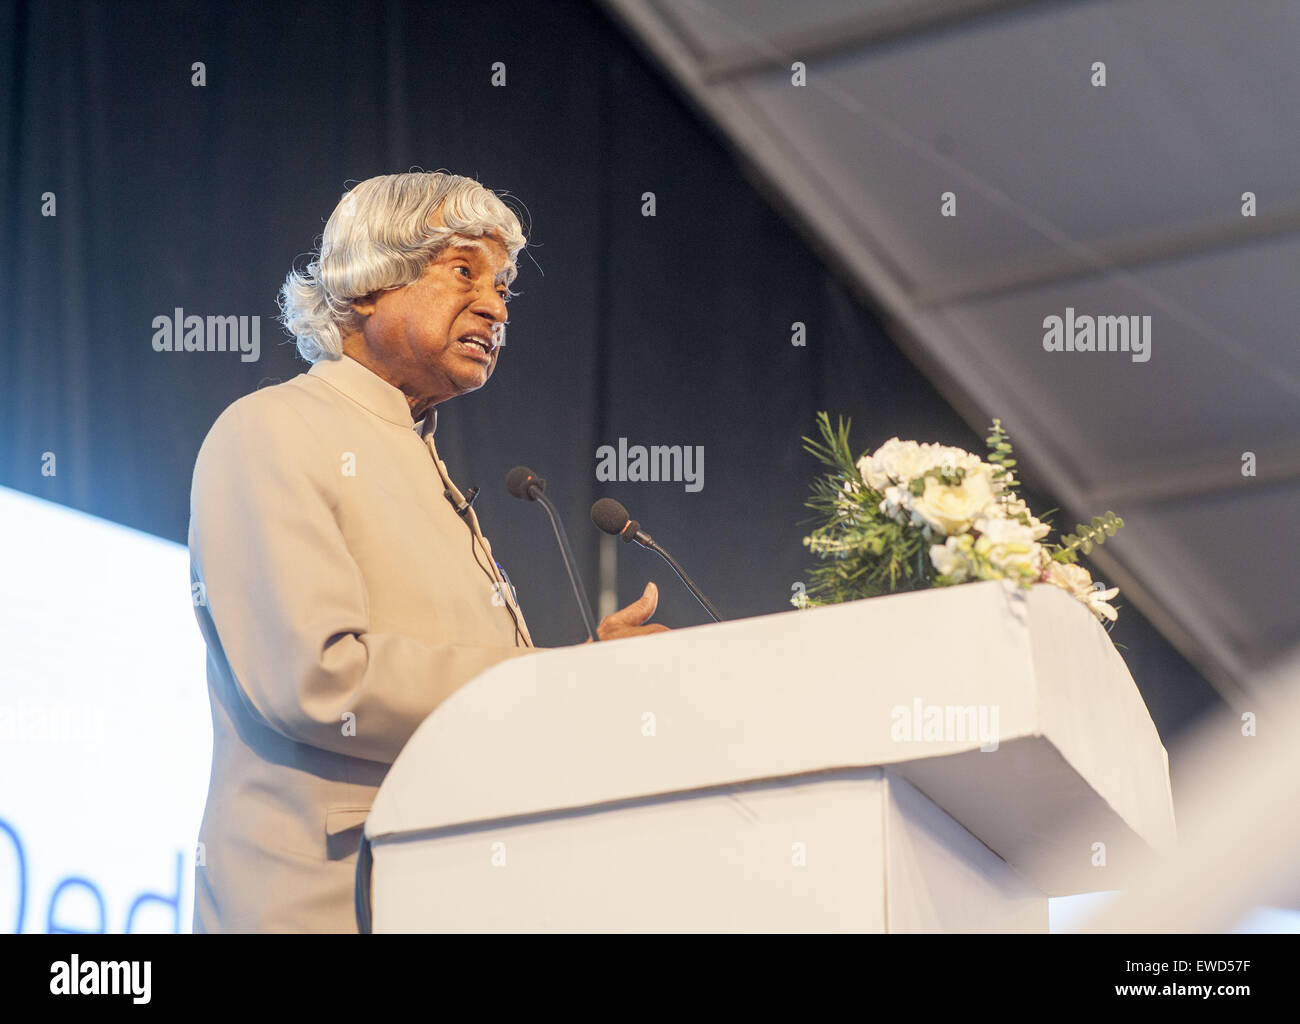 May 6, 2015 - Kochi, Kerala - 6th May, 2015 - KOchi - INDIA..Dr. A.P.J Abdul Kalam honorable former President of India adresses the audience during the inaguration of the Aster Medcity Hospital at Kochi..Aster DM is trying to tap IndiaÃ•s rapidly rising spending on health care and fill a gap in a country where facilities are lacking in a multibillion dollar industry. There is a growing demand for treatment amid rising incomes and proliferation of lifestyle diseases, including diabetes and heart conditions. .It is also targeting the burgeoning medical tourism industry from Maldives, Sri Lanka,  Stock Photo